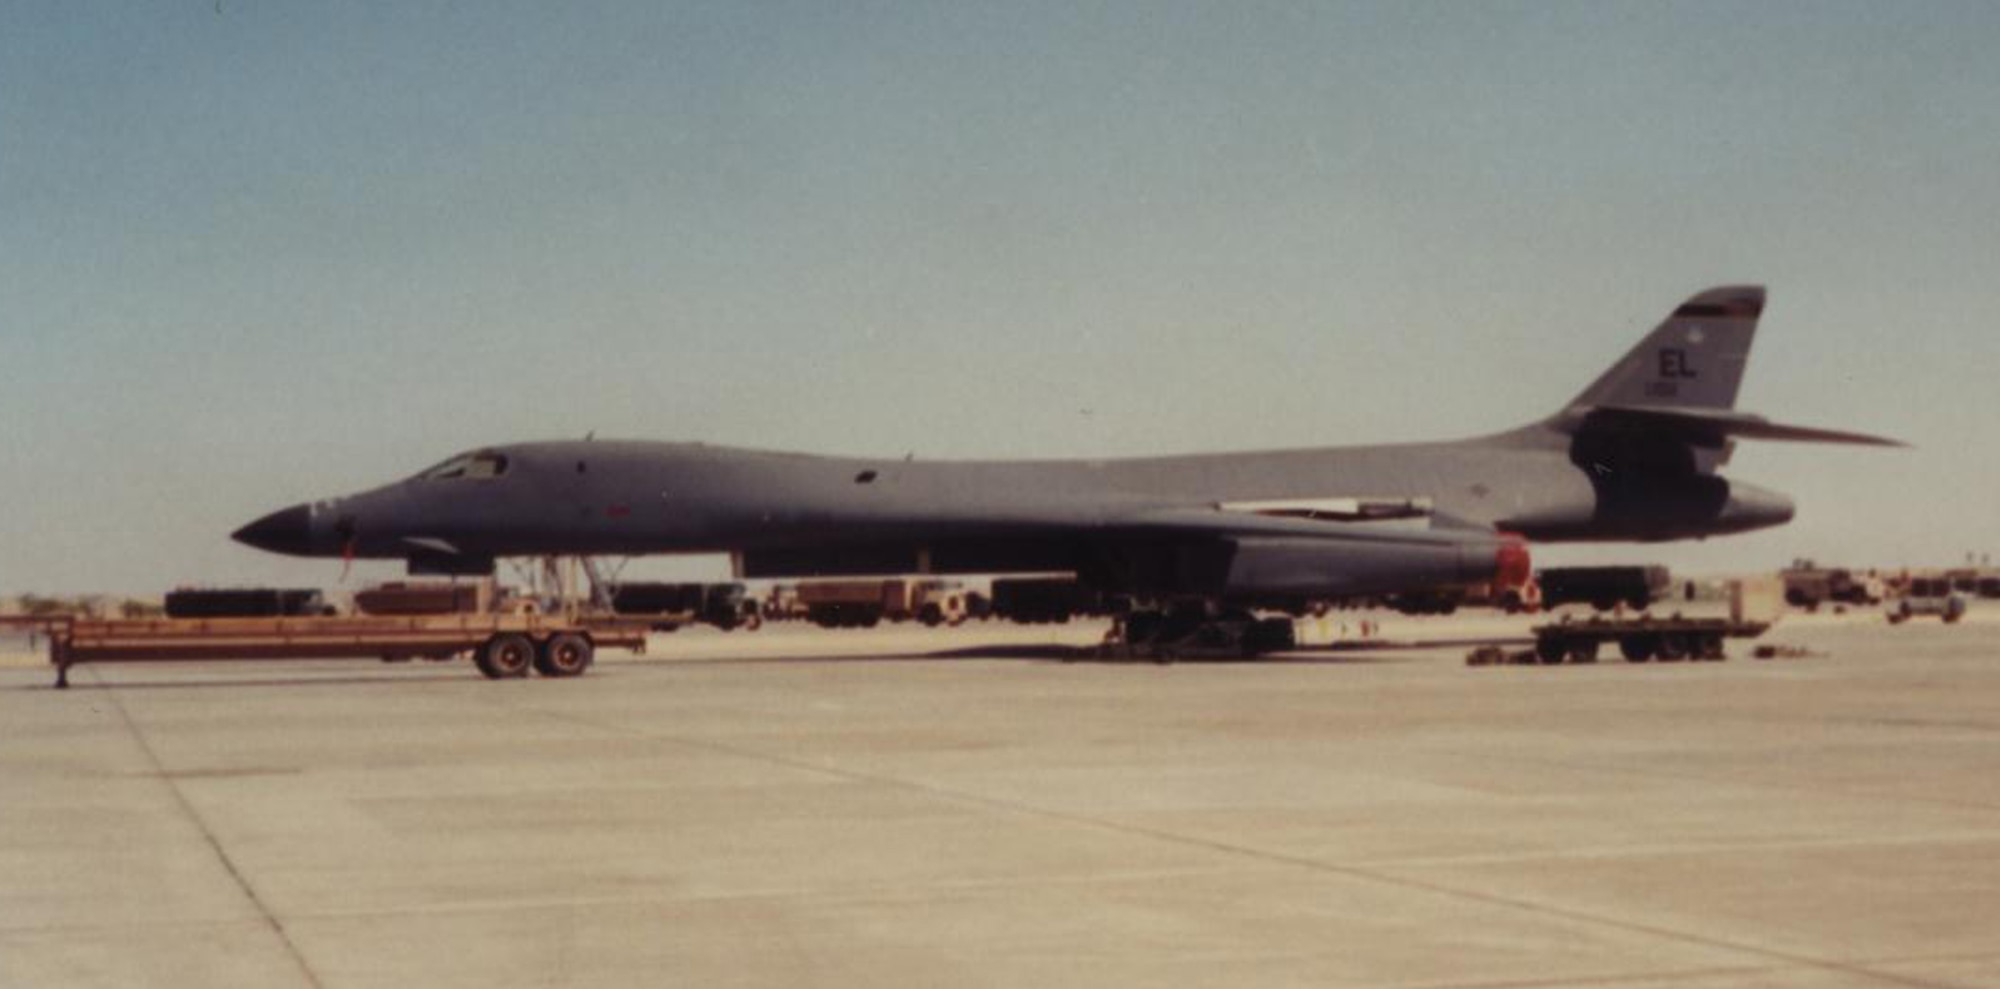 A B-1 bomber stands ready to be loaded with munitions in support of Operation Desert Fox on the flightline at Thumrait Air Base, Oman, December 1998.